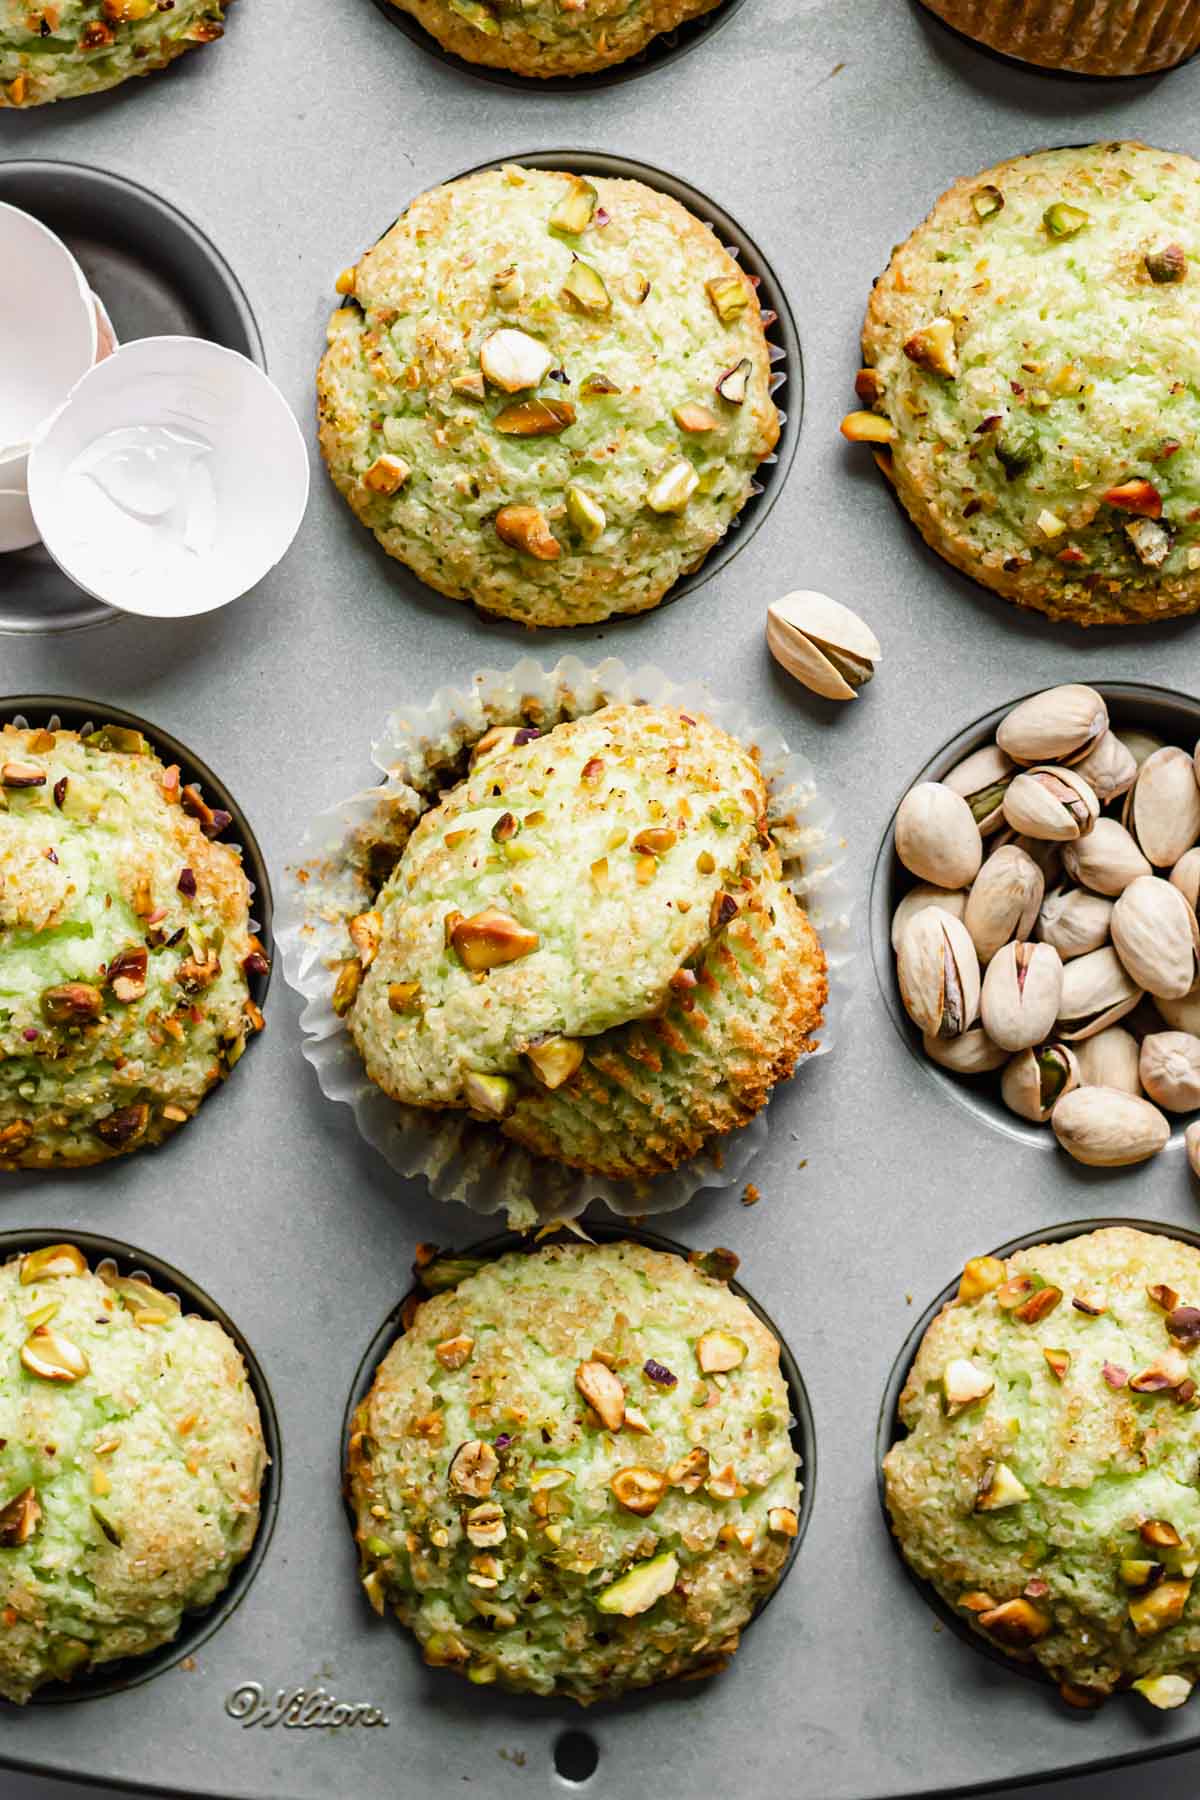 A muffin tin full of pistachio muffins. One muffin lays on its side and out of the liner next to a well of pistachios.